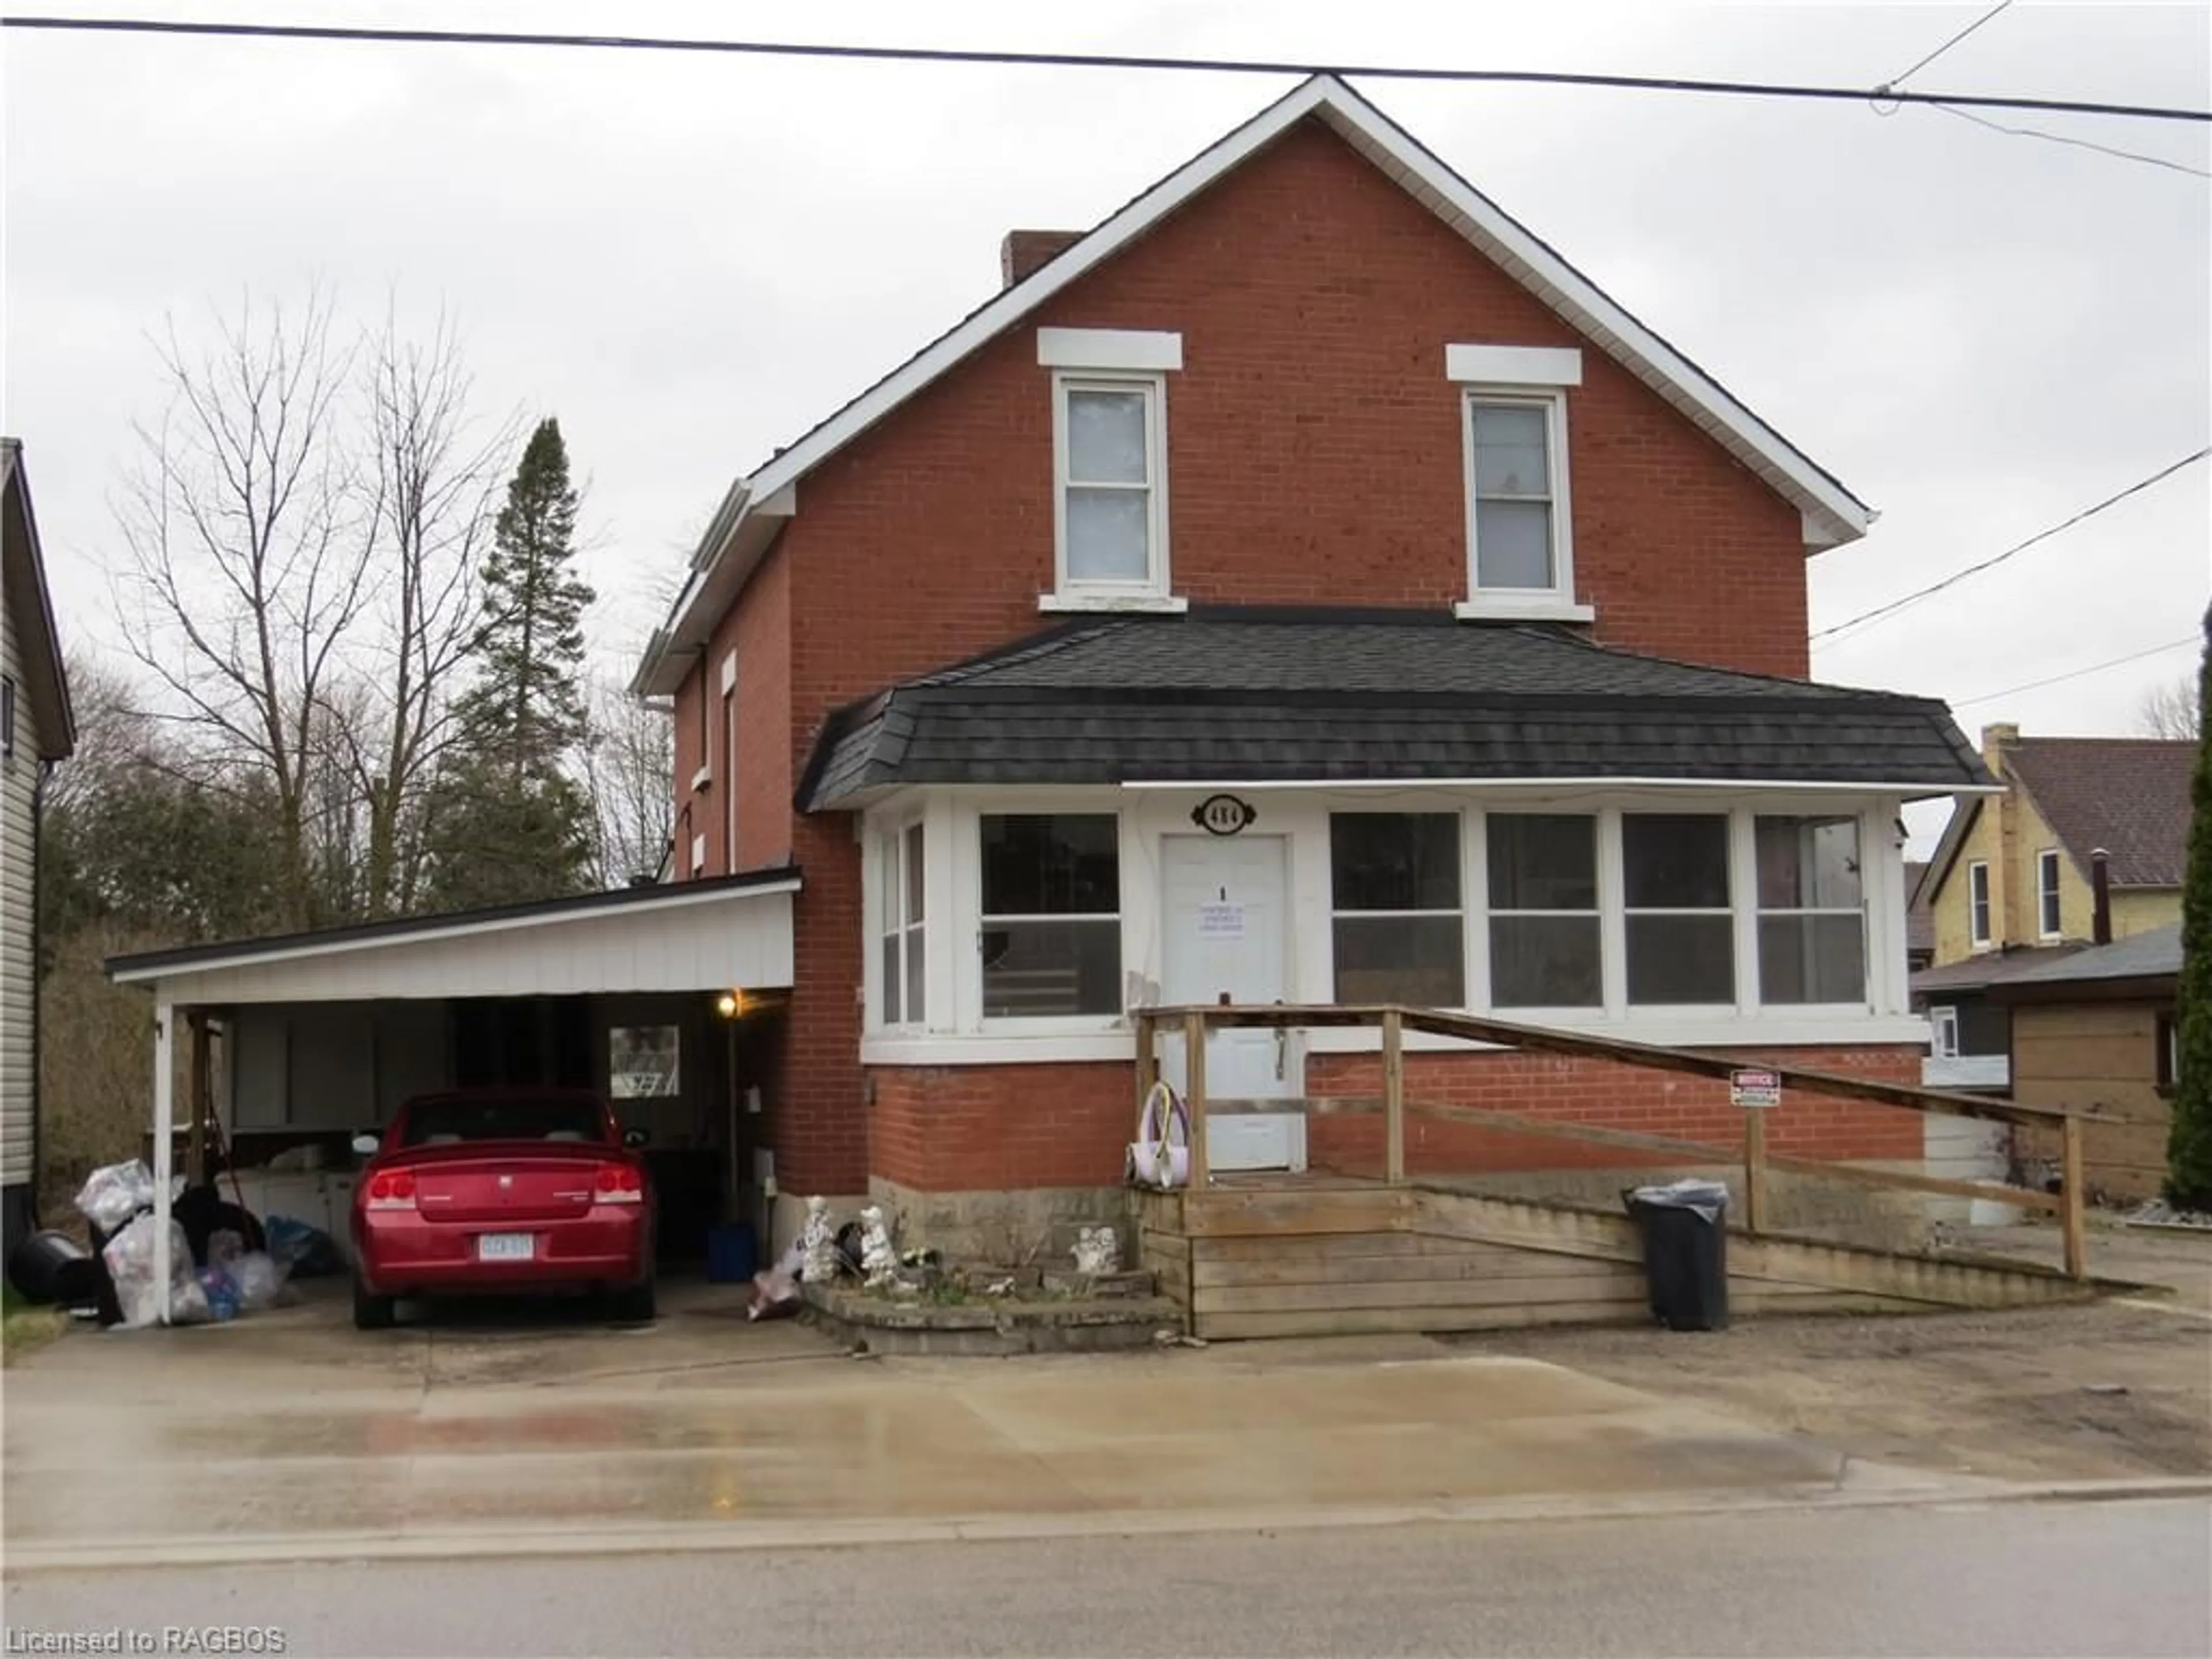 Outside view for 484 13th Ave, Hanover Ontario N4N 2W5